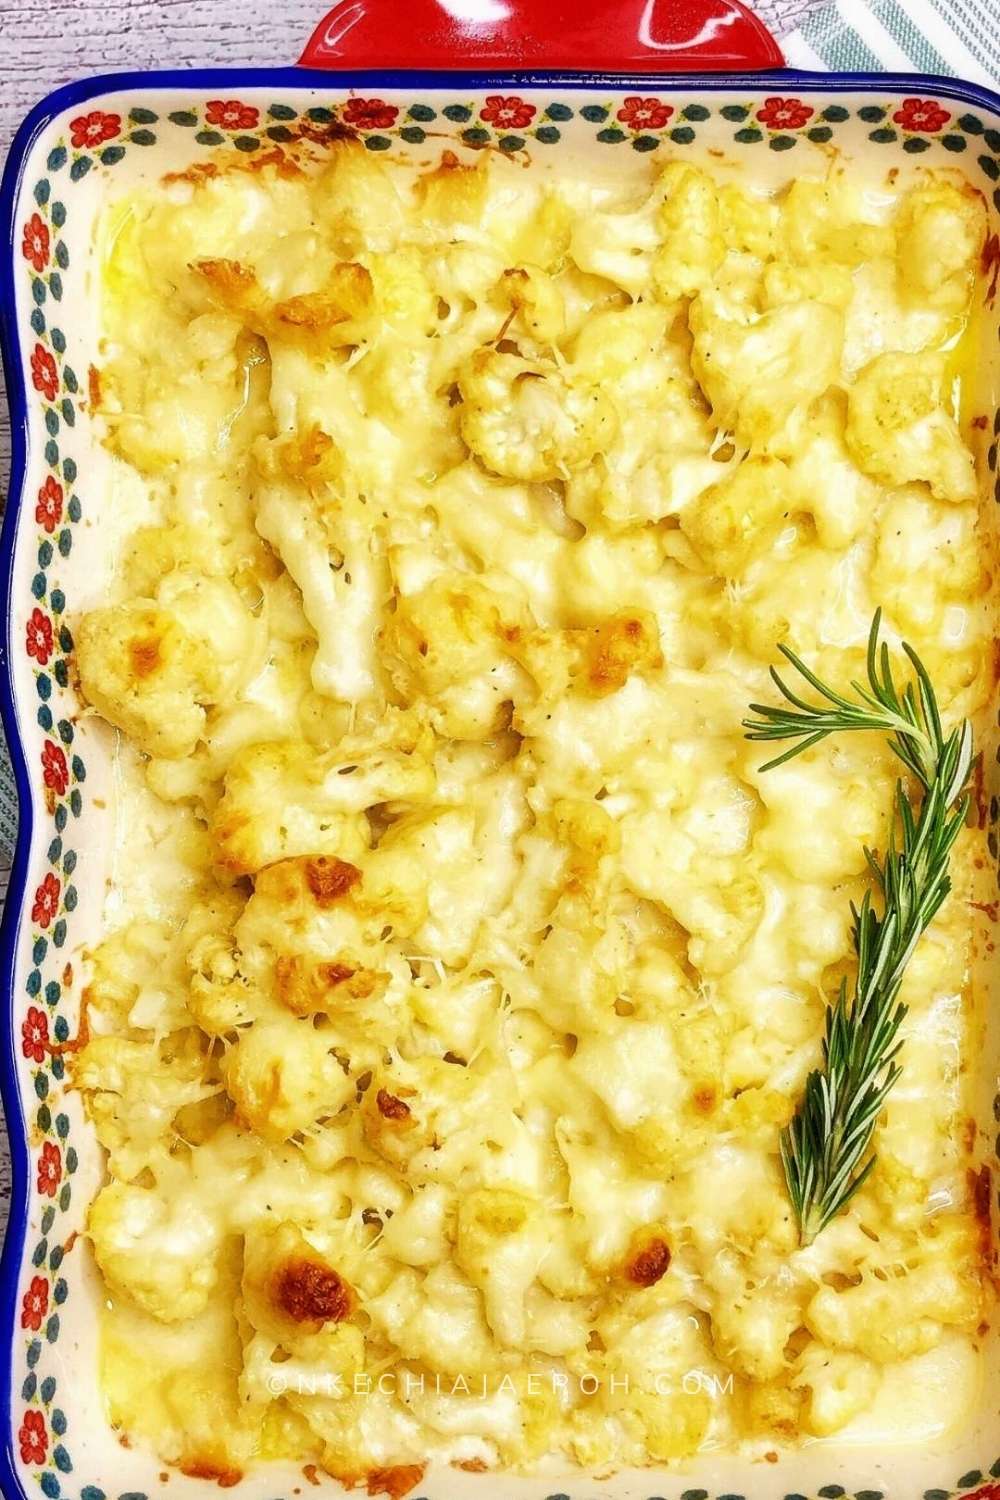 This creamy and insanely tasty cauliflower mac and cheese can compete with the real mac and cheese any time any day! Whether you are celebrating Thanksgiving, Christmas, or family reunion, this meal is a winner healthy side dish you want to present!